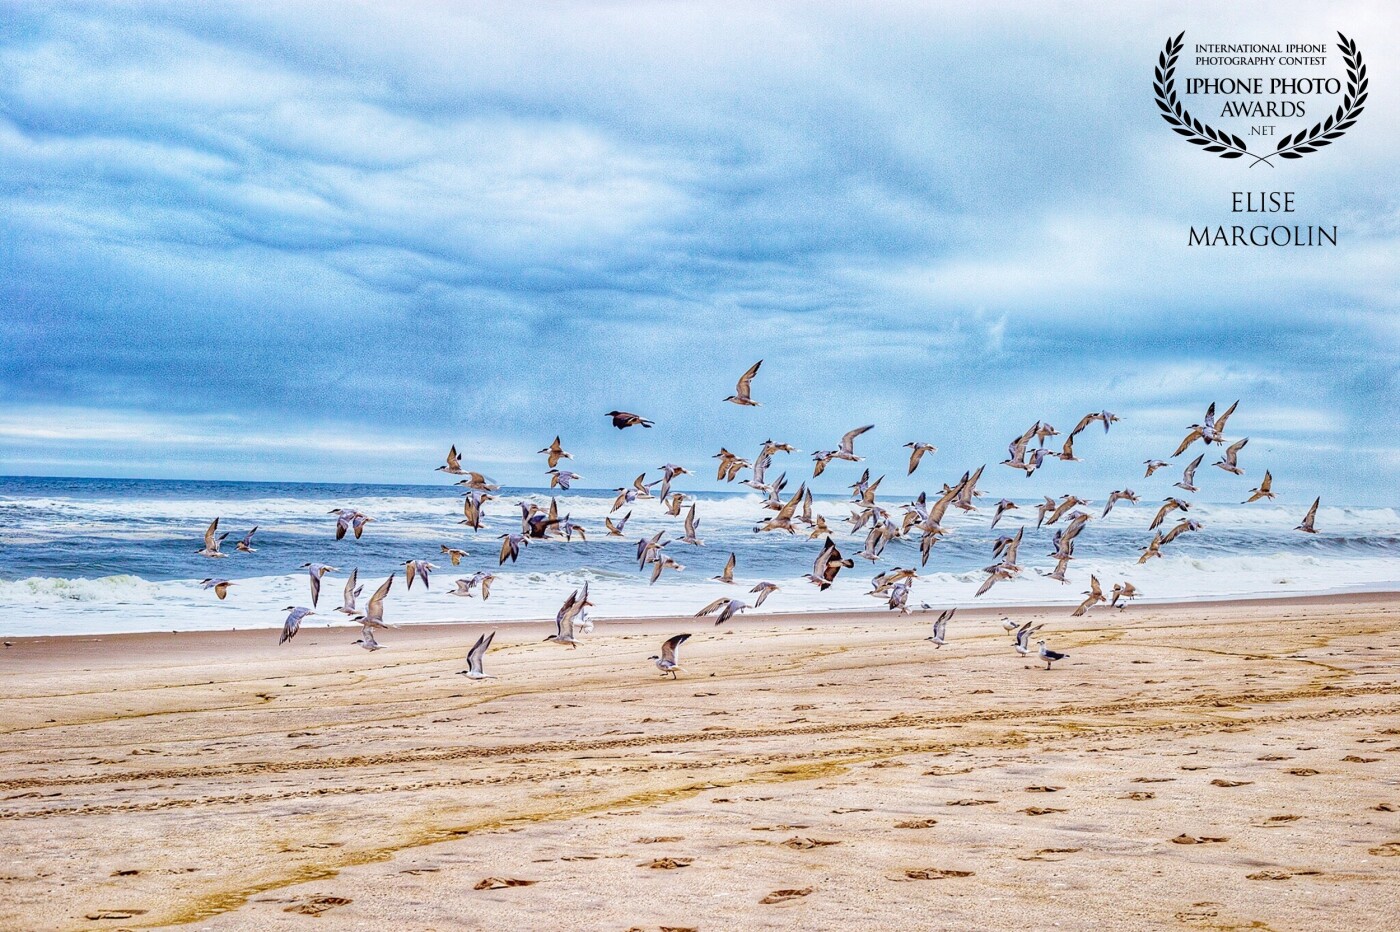 The Summer had come to an end. Even the seagulls were preparing  to fly south for Winter. I got lucky to capture such a freeing moment on what was such a gloomy day. 